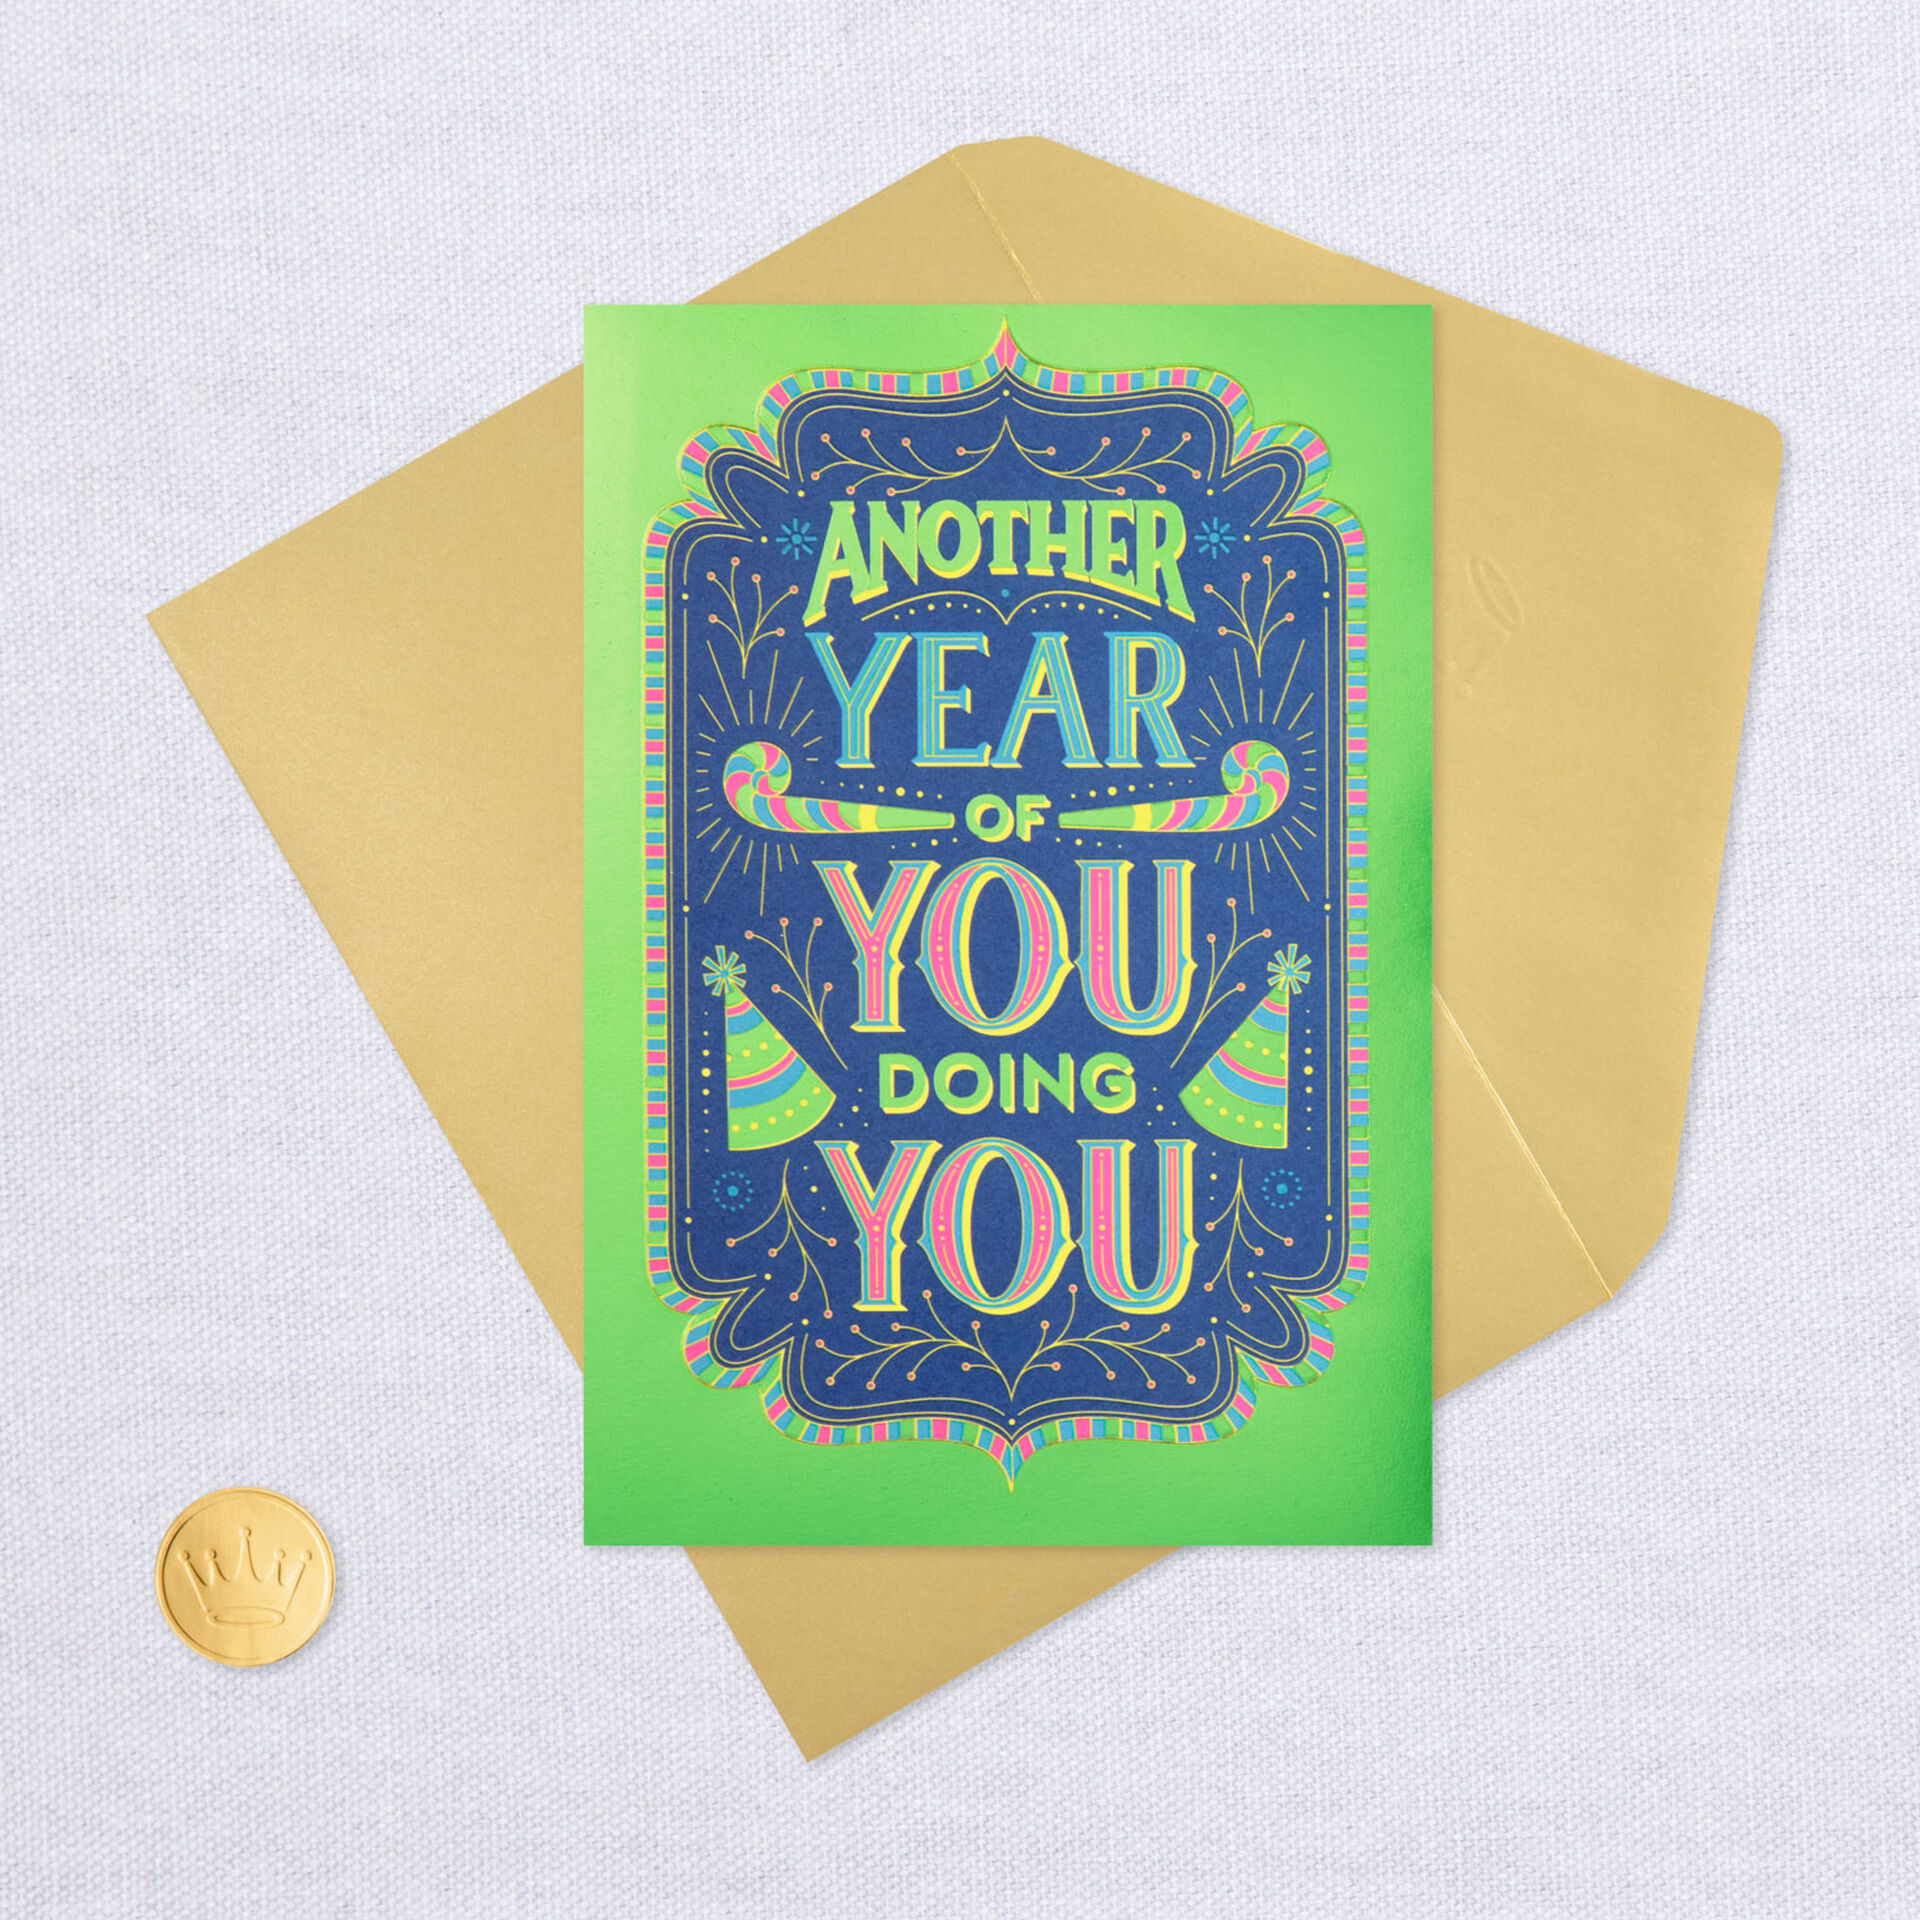 Another Year of You Doing You Birthday Card - Greeting Cards - Hallmark